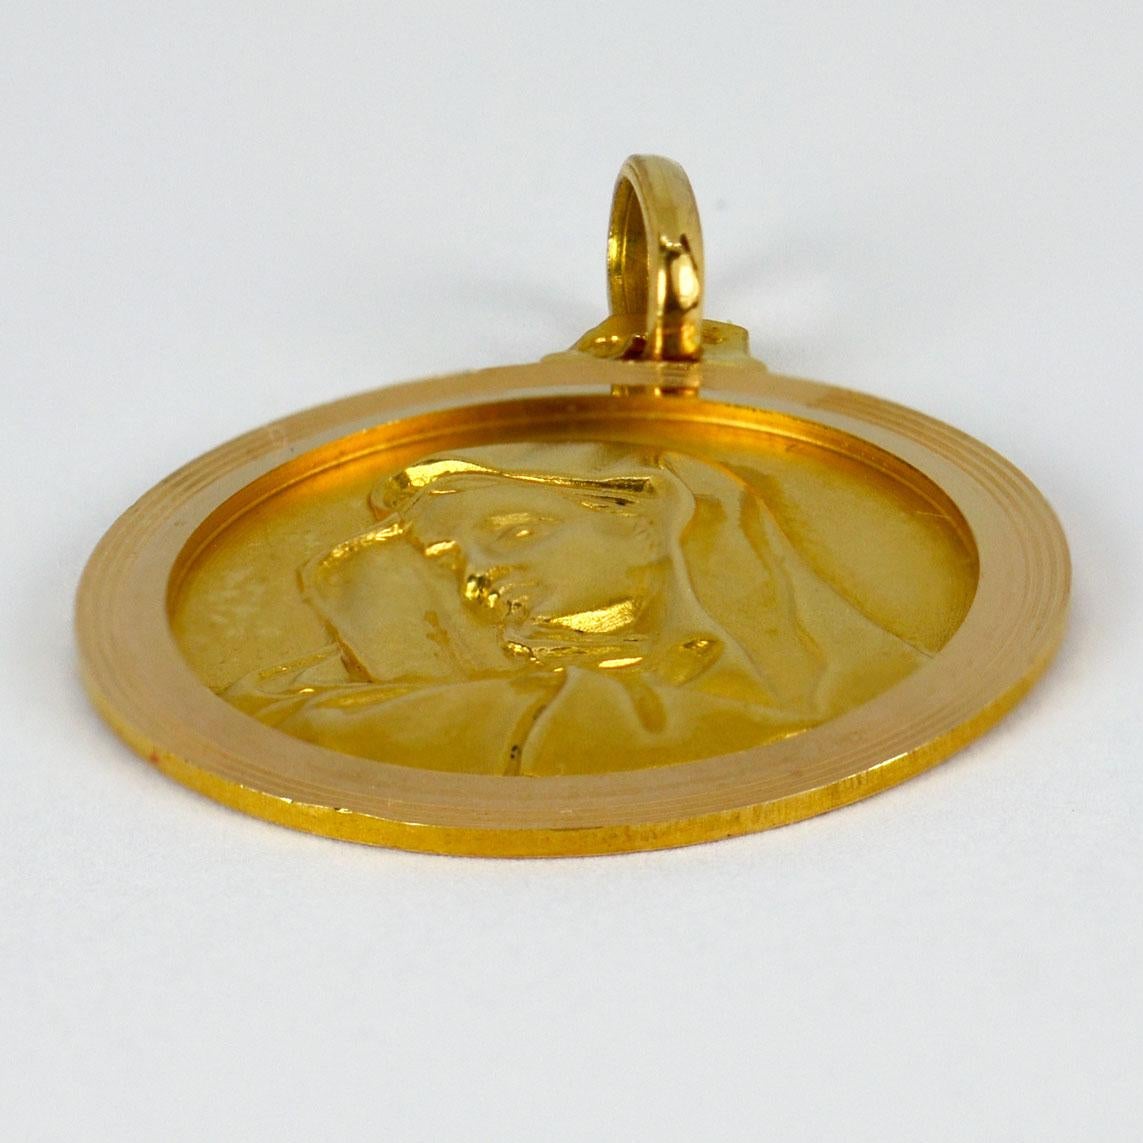 An 18 karat (18K) yellow gold pendant designed as a round medal depicting the Virgin Mary. Stamped with the eagle’s head for French manufacture and 18 karat gold, with unknown maker’s mark.

Dimensions: 2.6 x 2.2 x 0.13 cm (not including jump